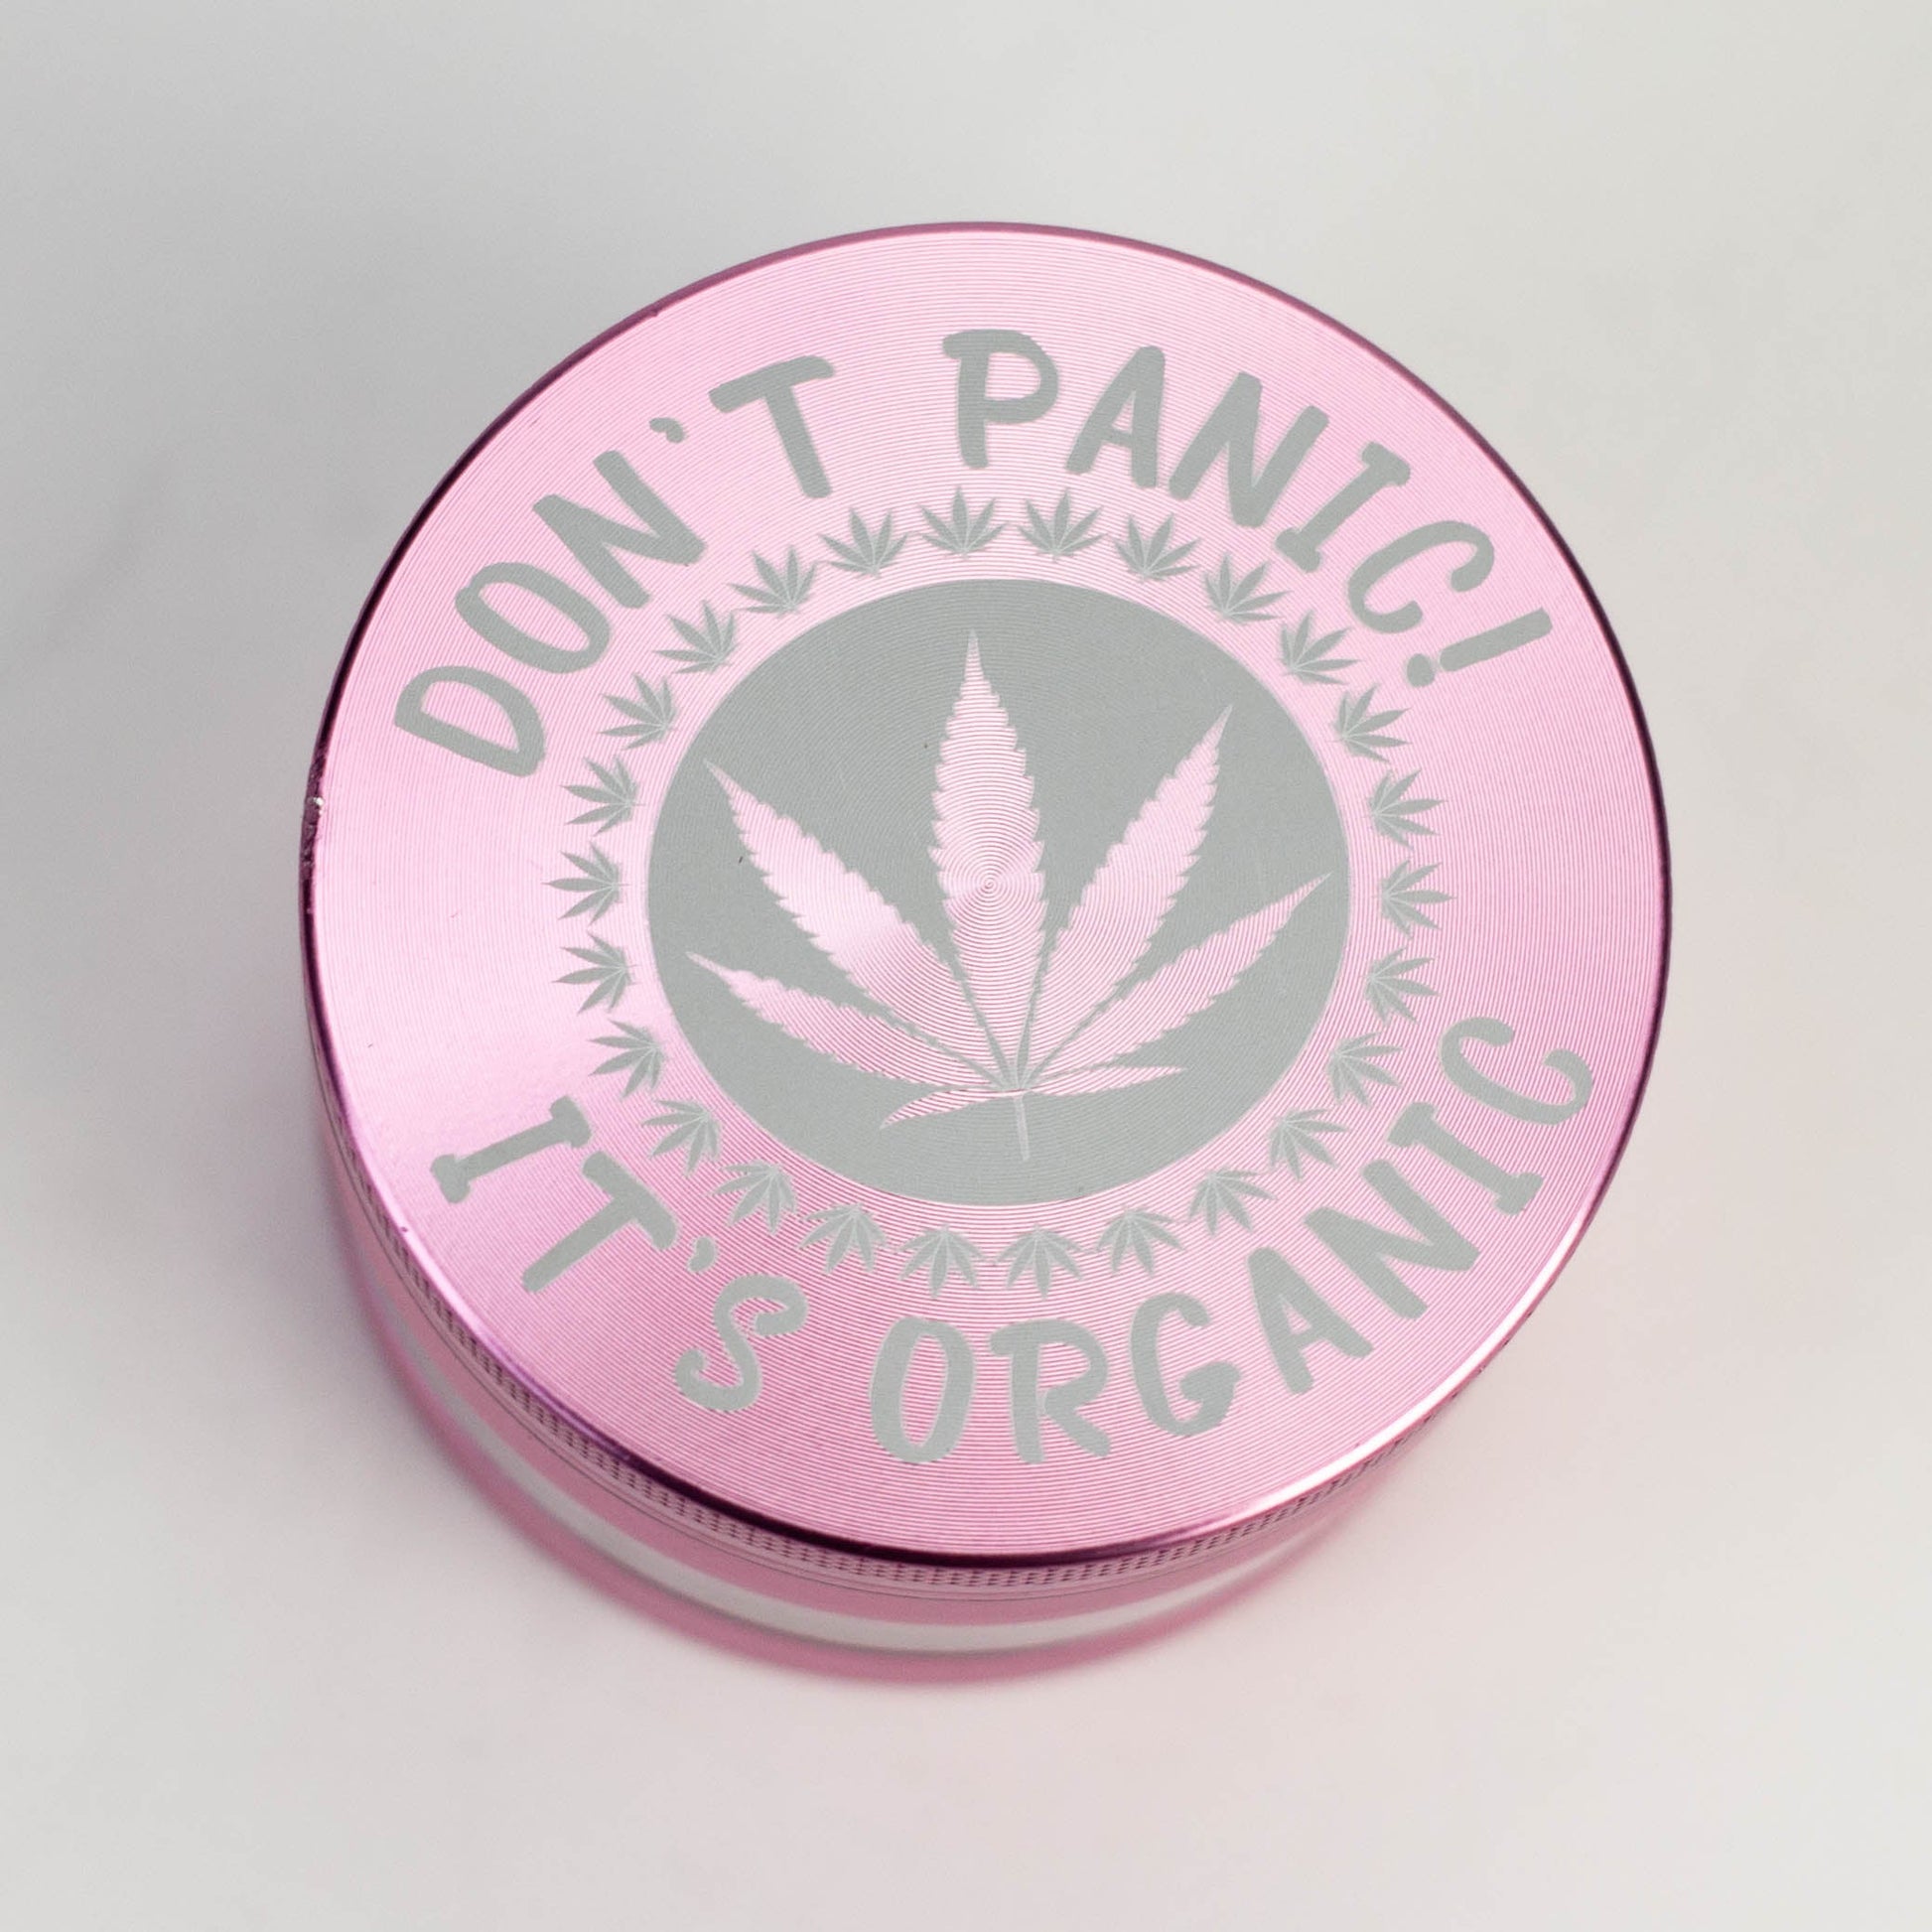 Heavy Duty Large "Don't Panic It's Organic" 4 Parts Weed Grinder Engraved in Canada_3